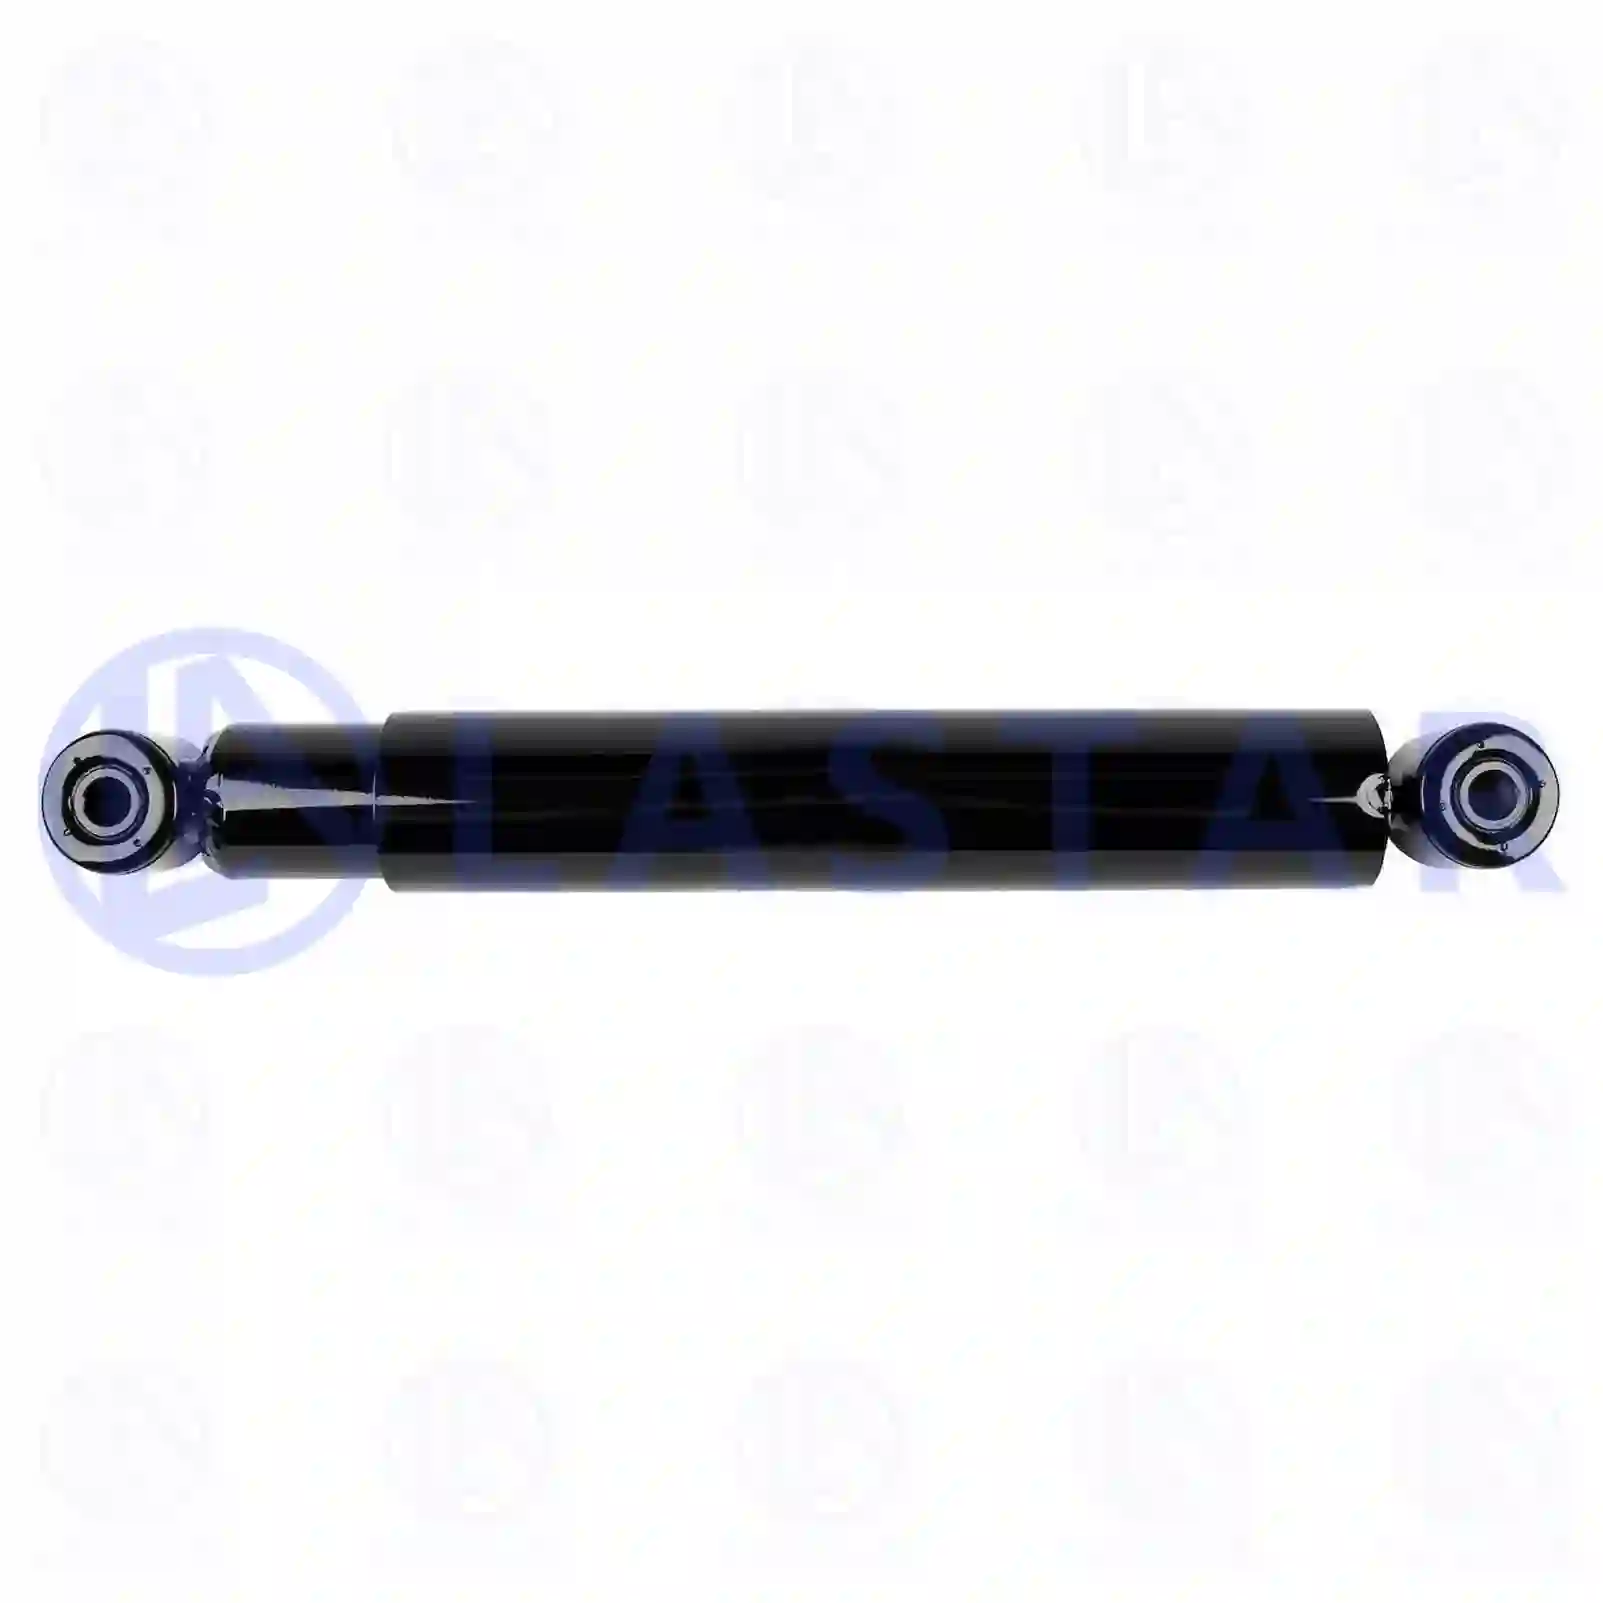 Shock absorber, 77727848, 0063231900, 0063233300, 0063233900, 0063234000, 0063237400, ZG41592-0008 ||  77727848 Lastar Spare Part | Truck Spare Parts, Auotomotive Spare Parts Shock absorber, 77727848, 0063231900, 0063233300, 0063233900, 0063234000, 0063237400, ZG41592-0008 ||  77727848 Lastar Spare Part | Truck Spare Parts, Auotomotive Spare Parts